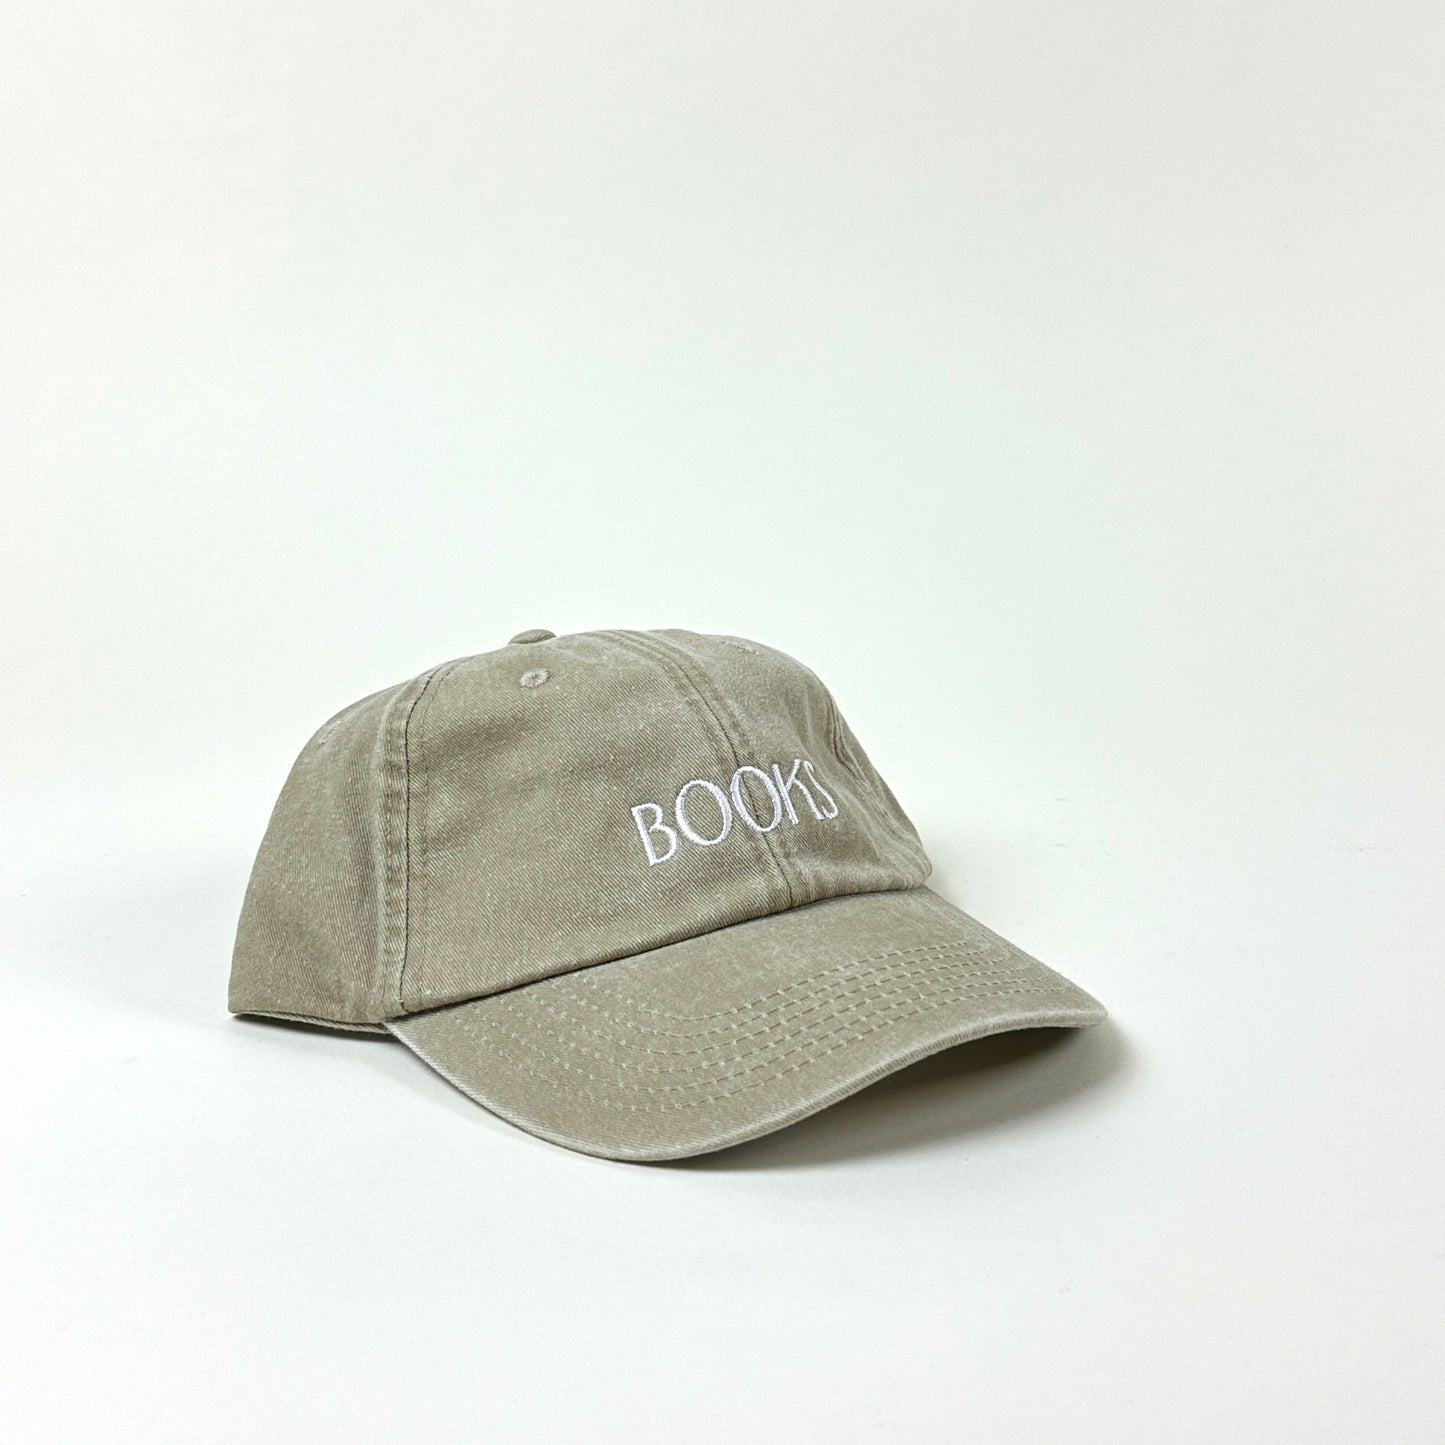 Hat, Books (washed out beige/white)